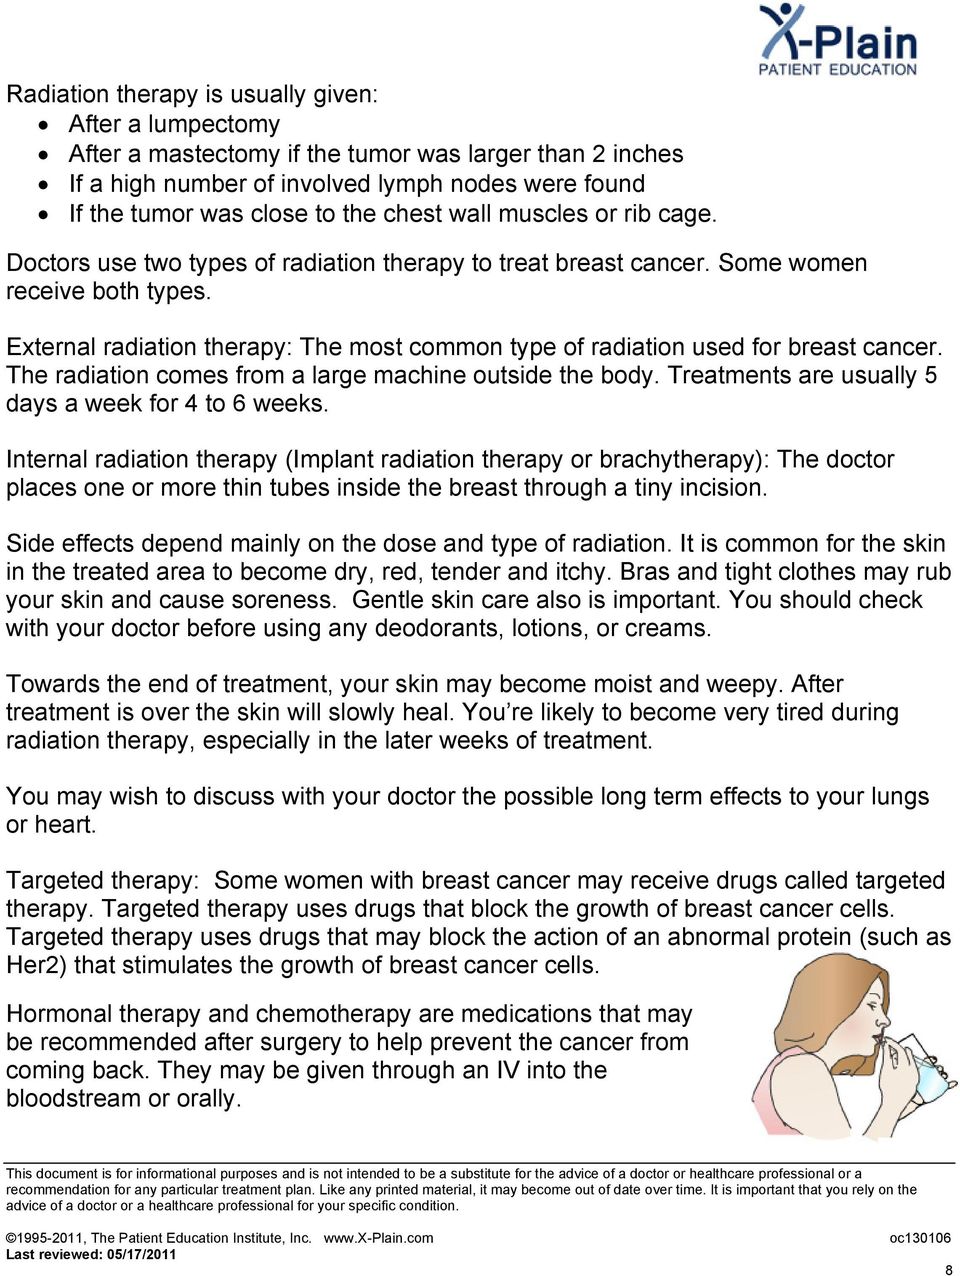 External radiation therapy: The most common type of radiation used for breast cancer. The radiation comes from a large machine outside the body. Treatments are usually 5 days a week for 4 to 6 weeks.